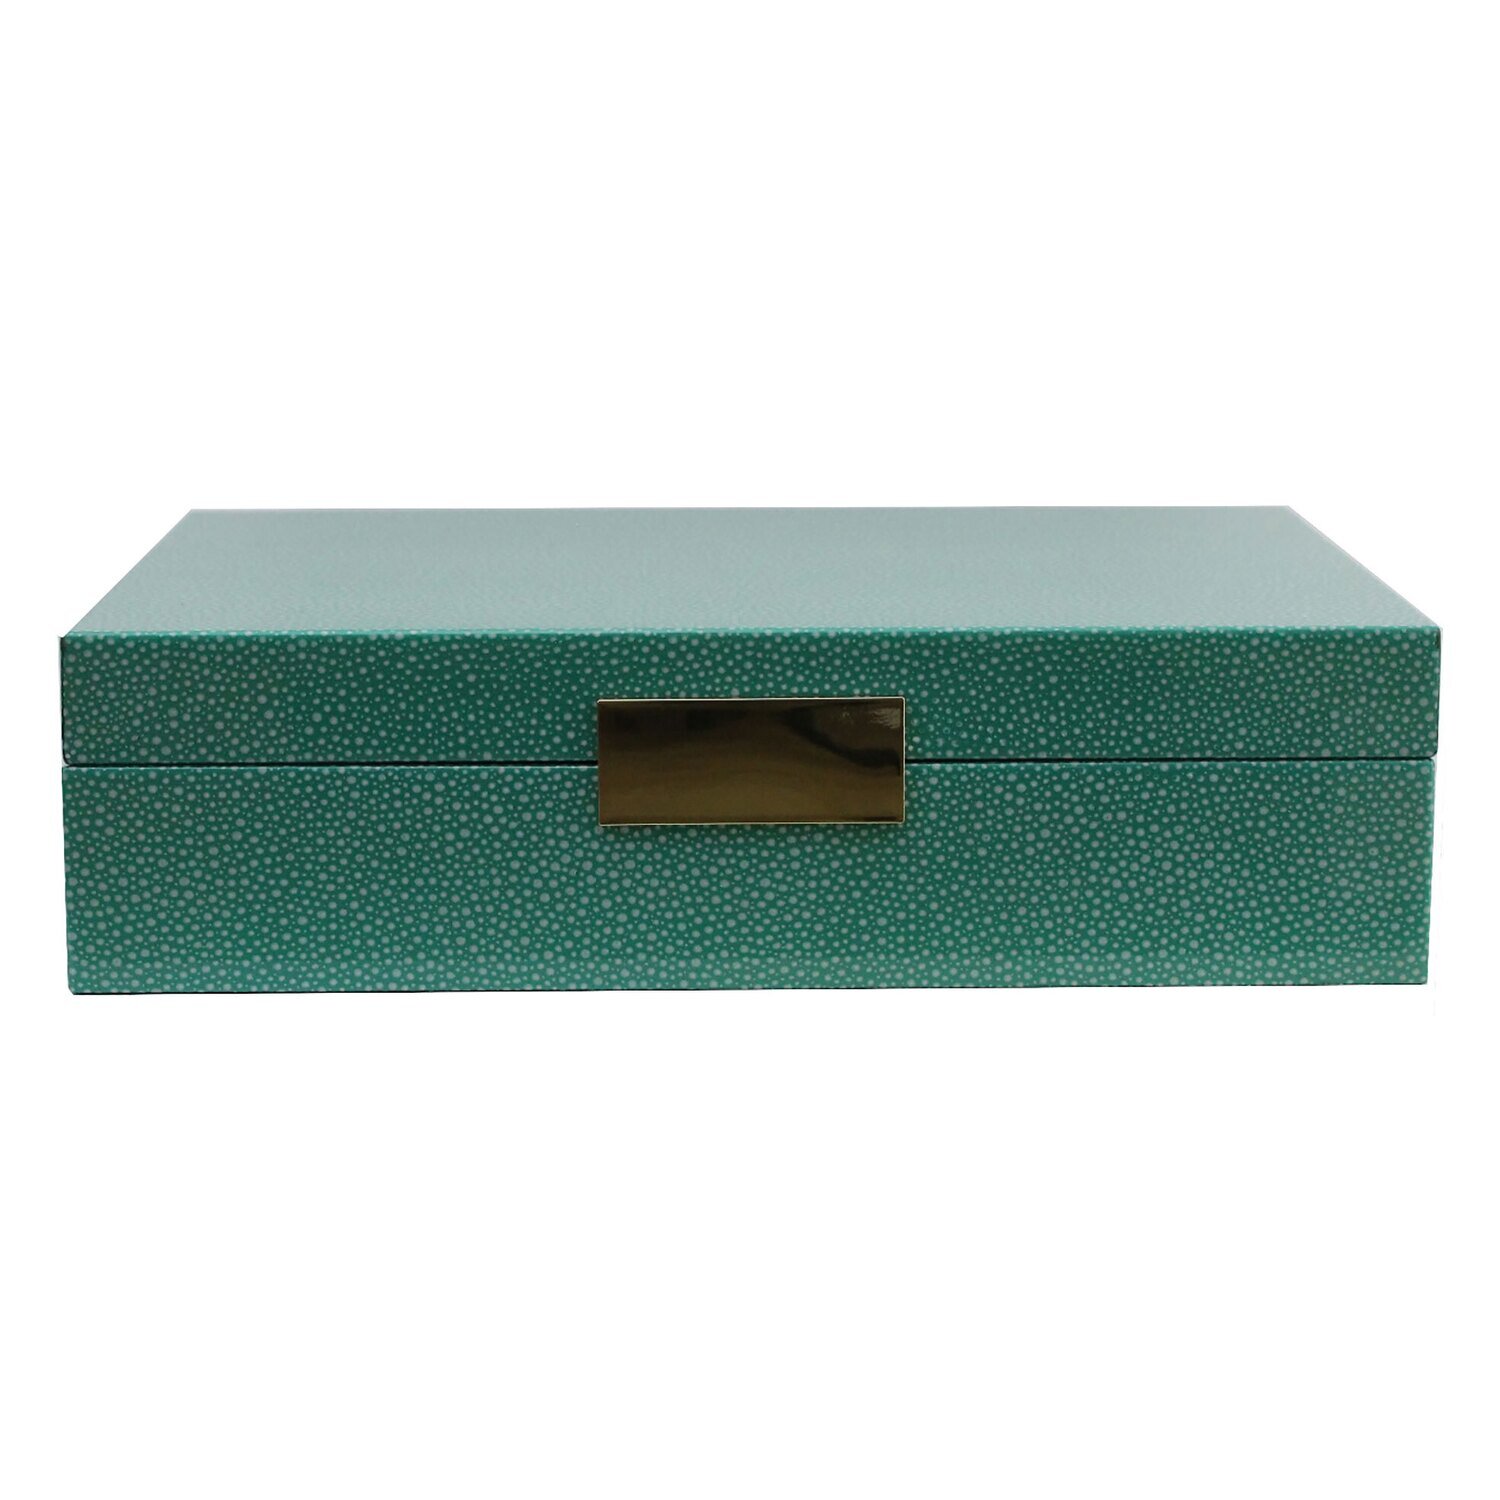 Addison Ross Green Shagreen Storage Box8 x 11 Inch Lacquer BX1450